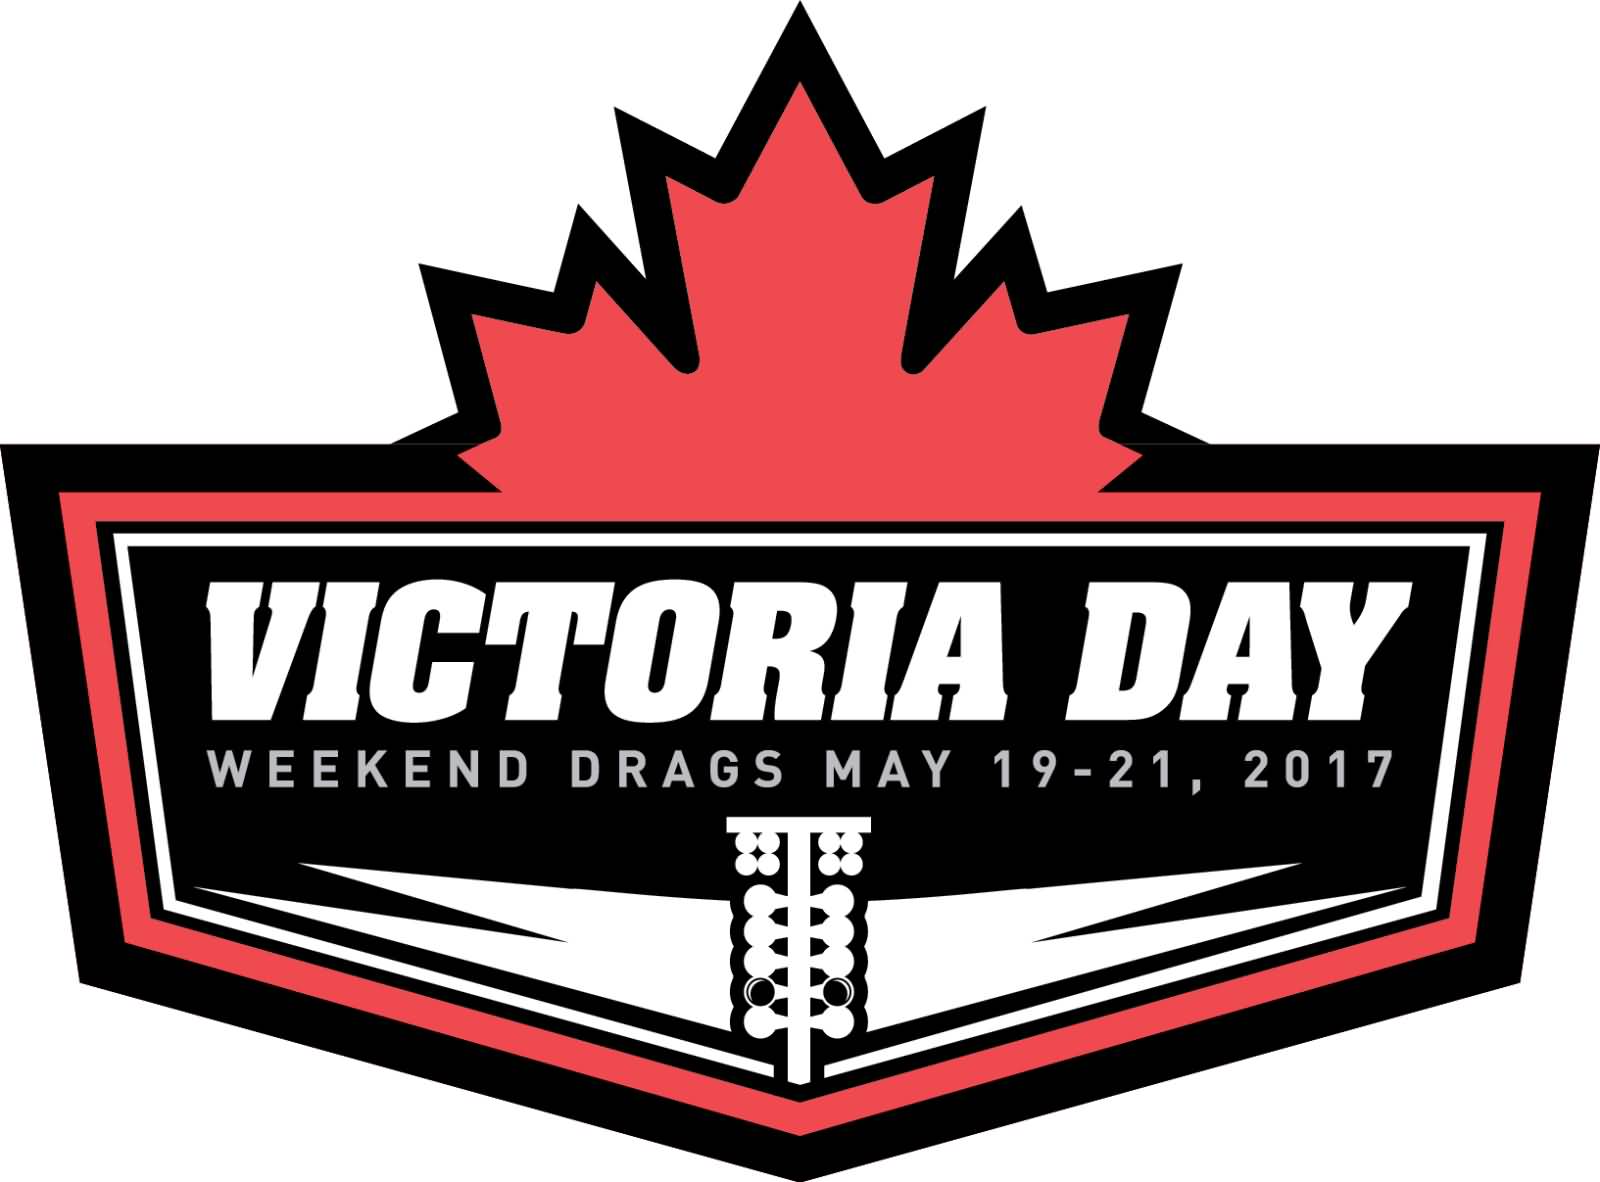 Victoria Day Weekend Drags May 19-21, 2017